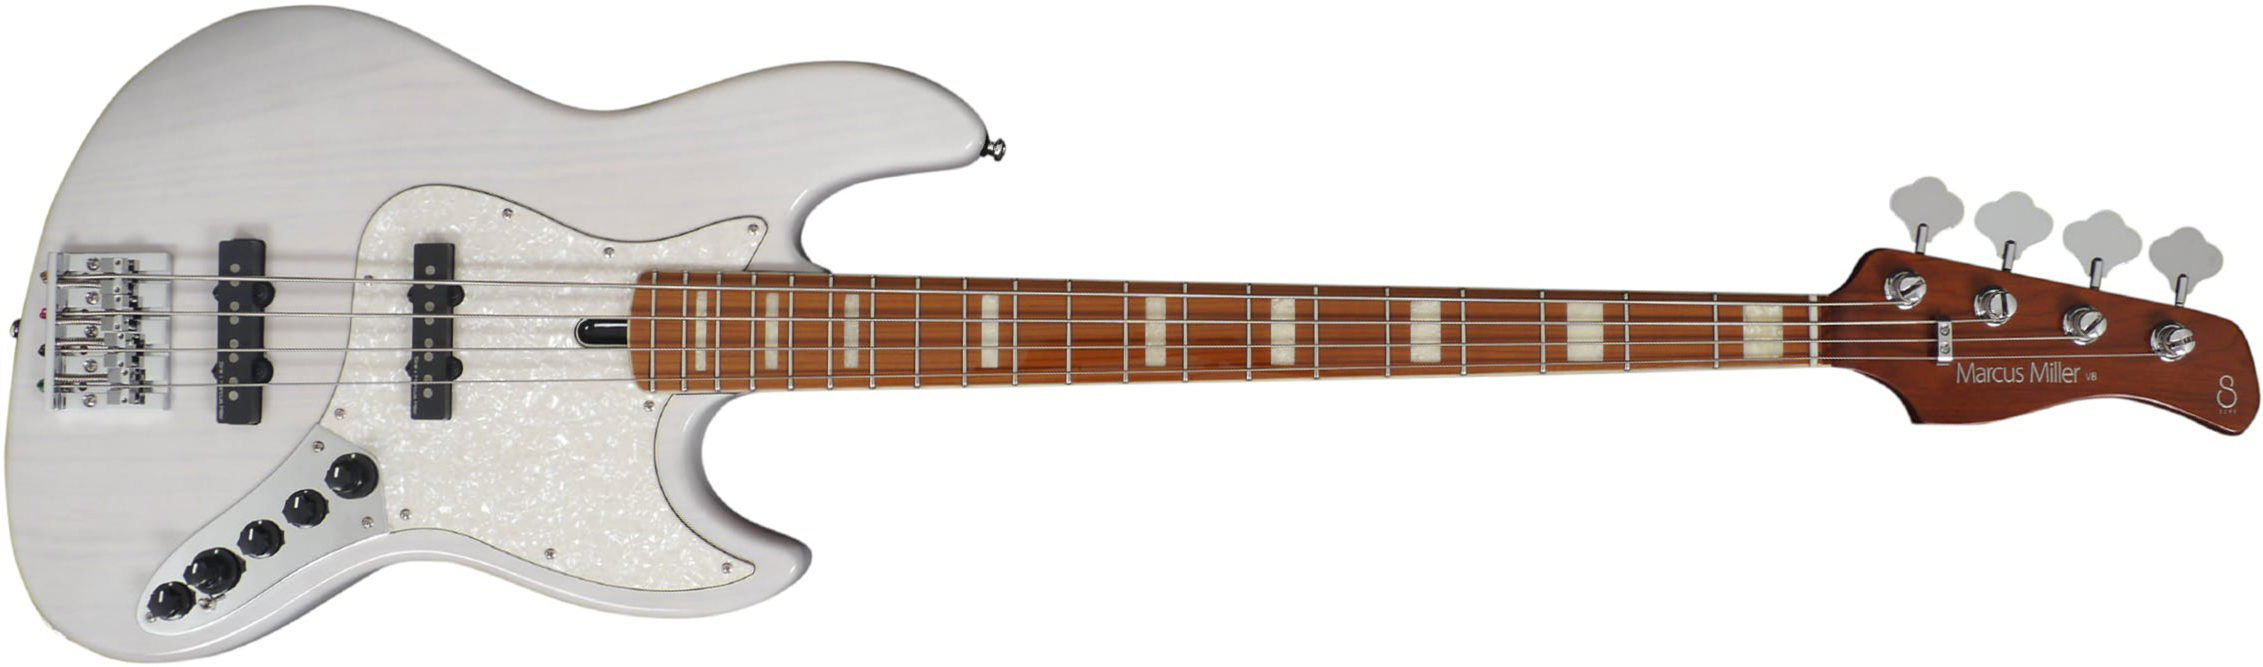 Marcus Miller V8 4st Active Mn - White Blonde - Solidbody E-bass - Main picture